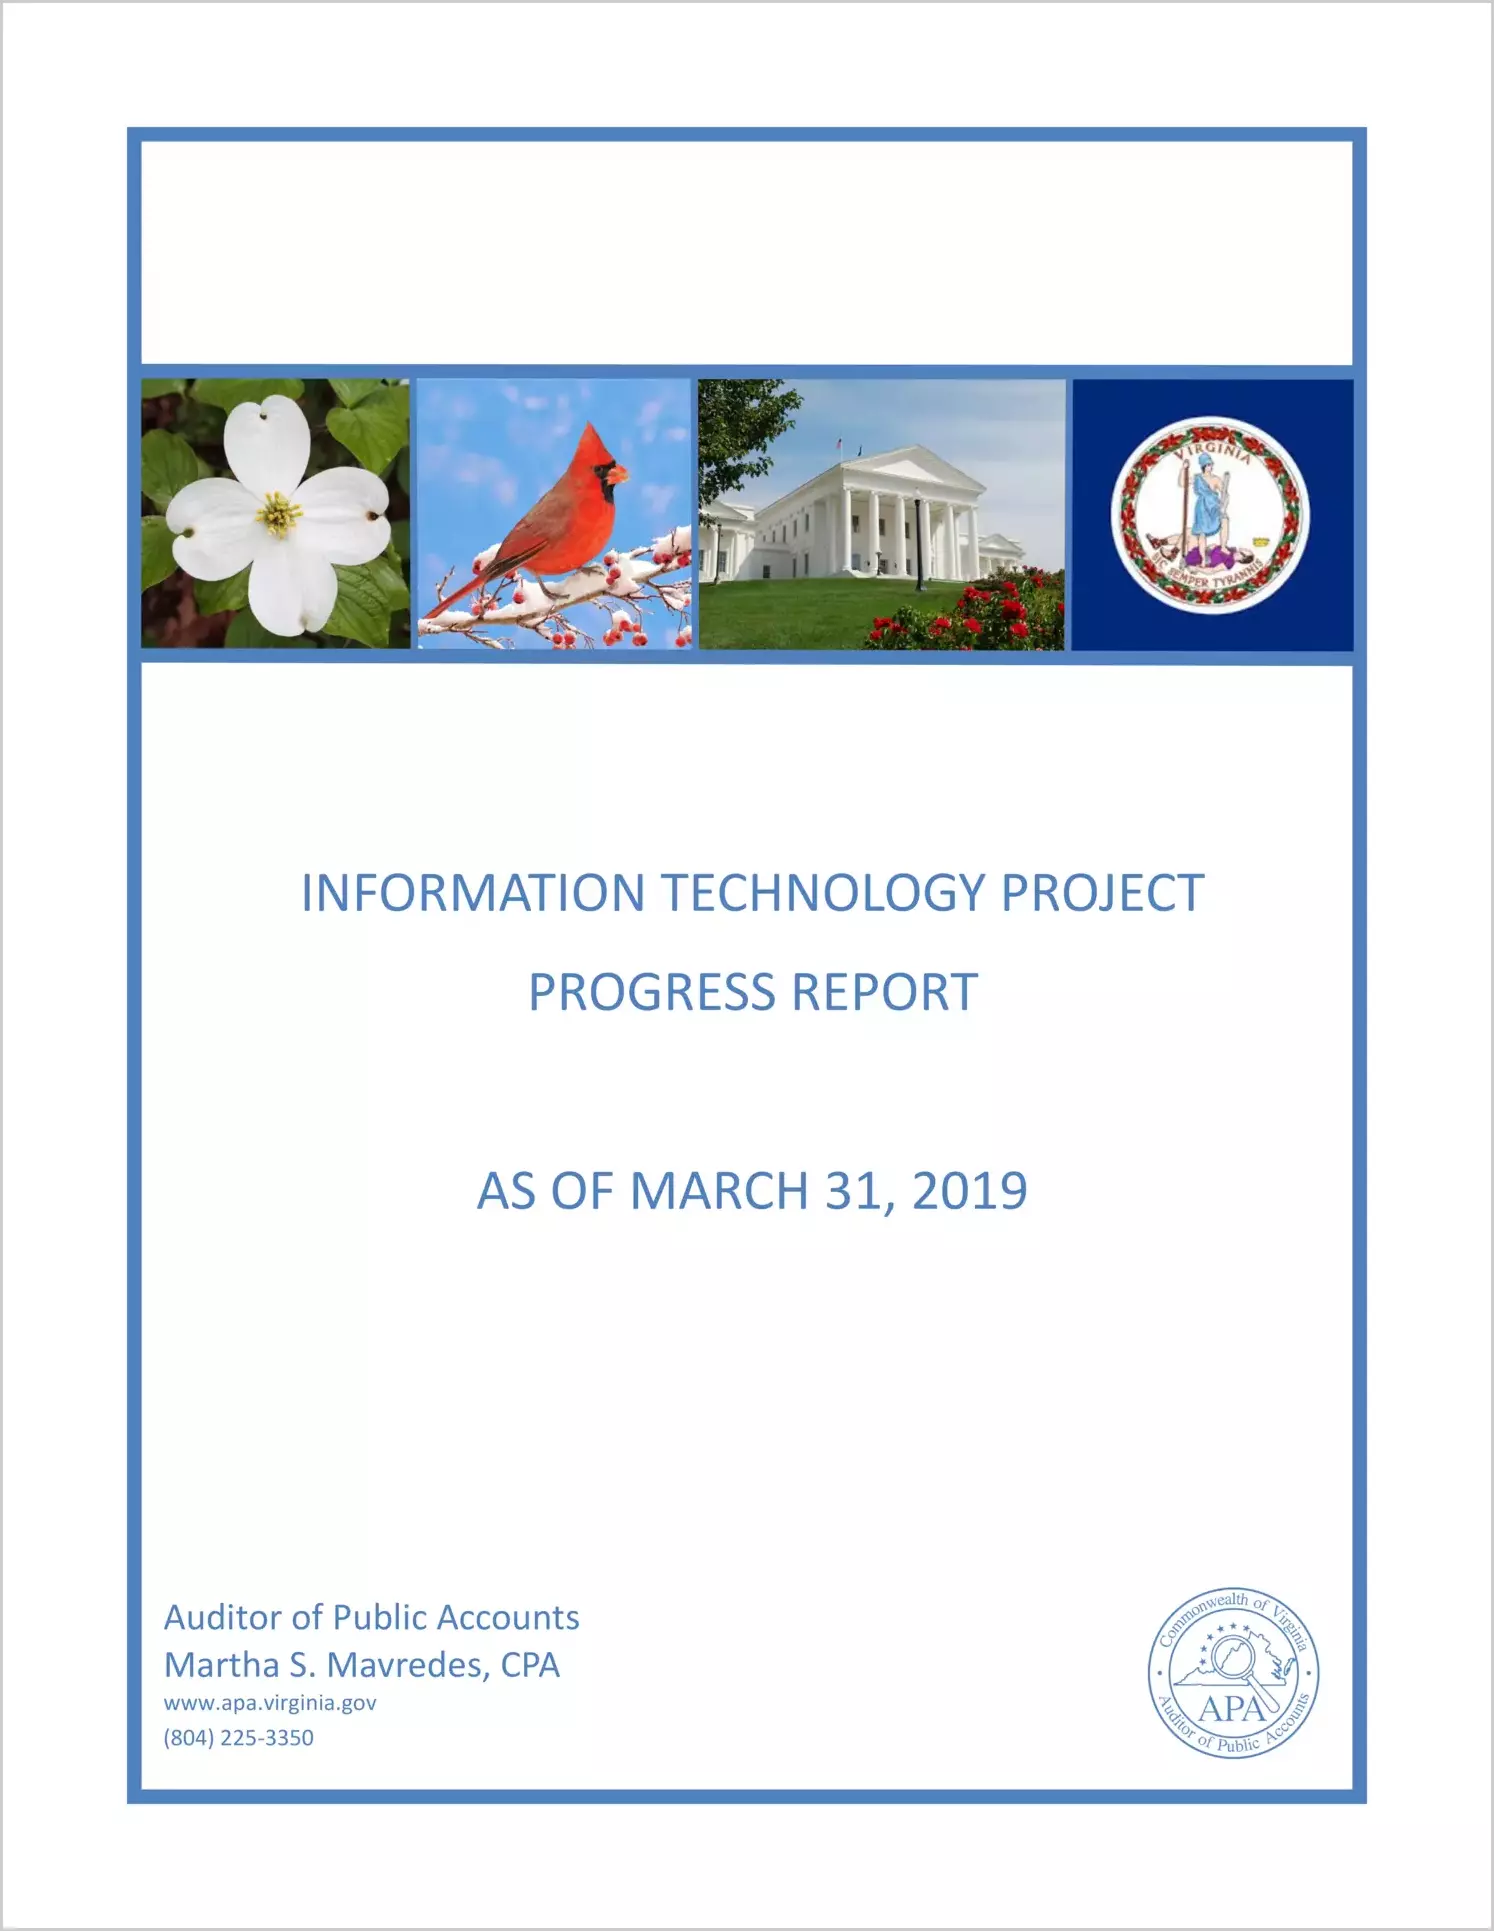 Information Technology Project Progress Report as of March 31, 2019